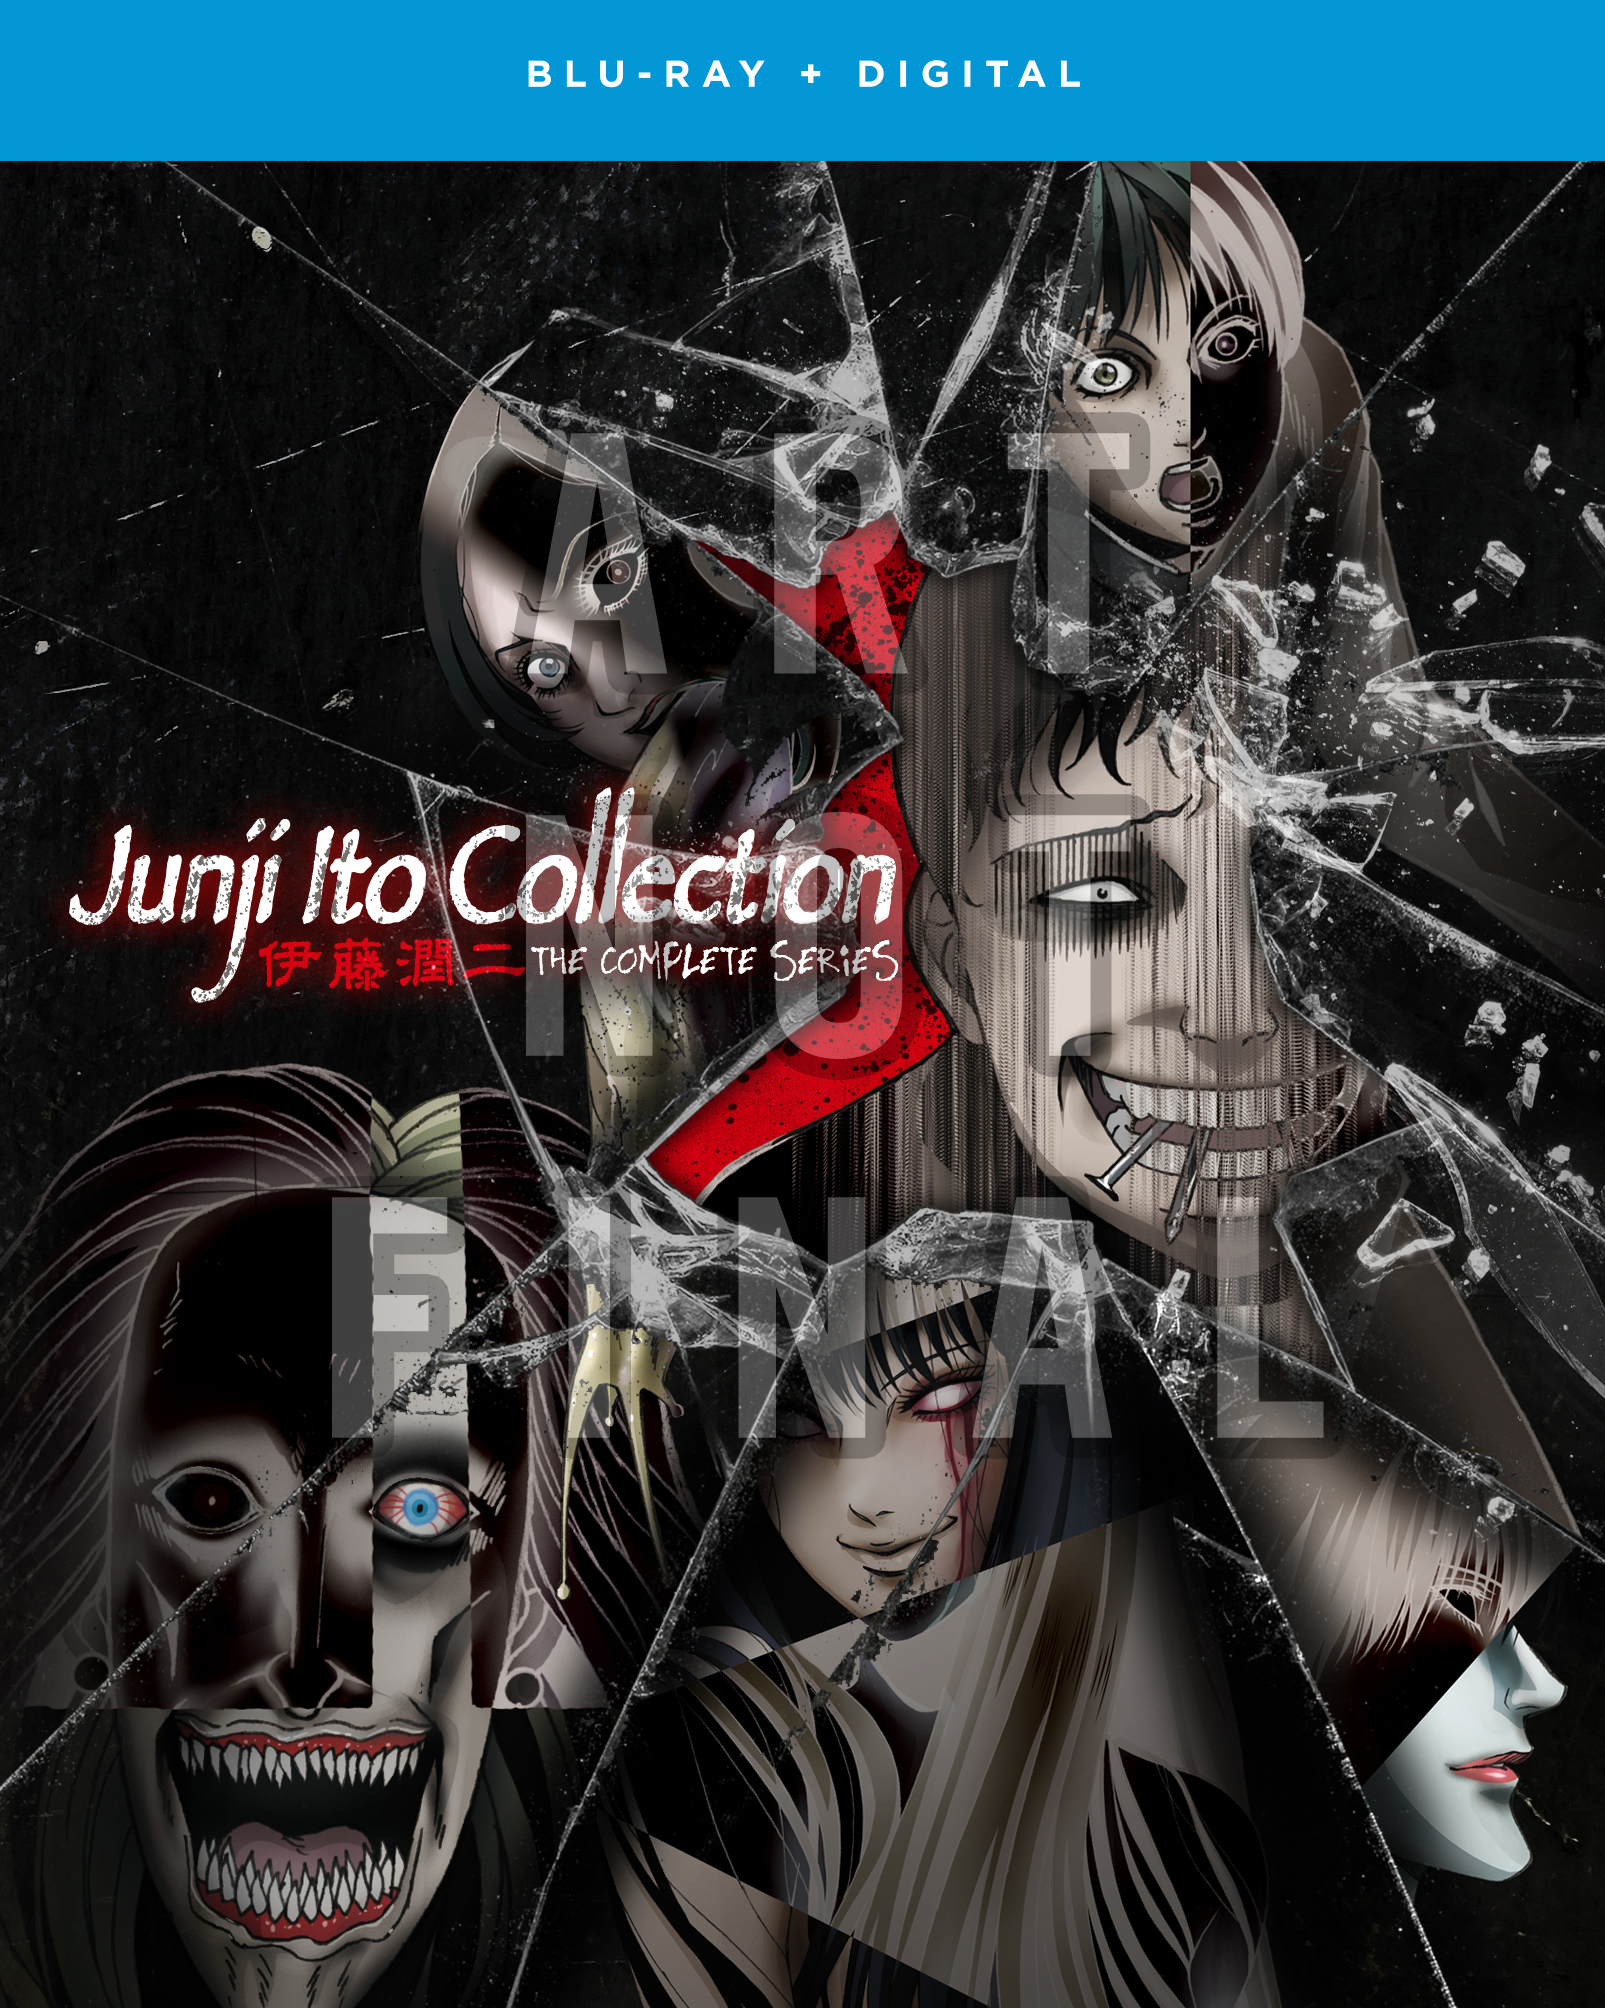 Junji Ito Collection: The Complete Series [Blu-ray] [2 Discs